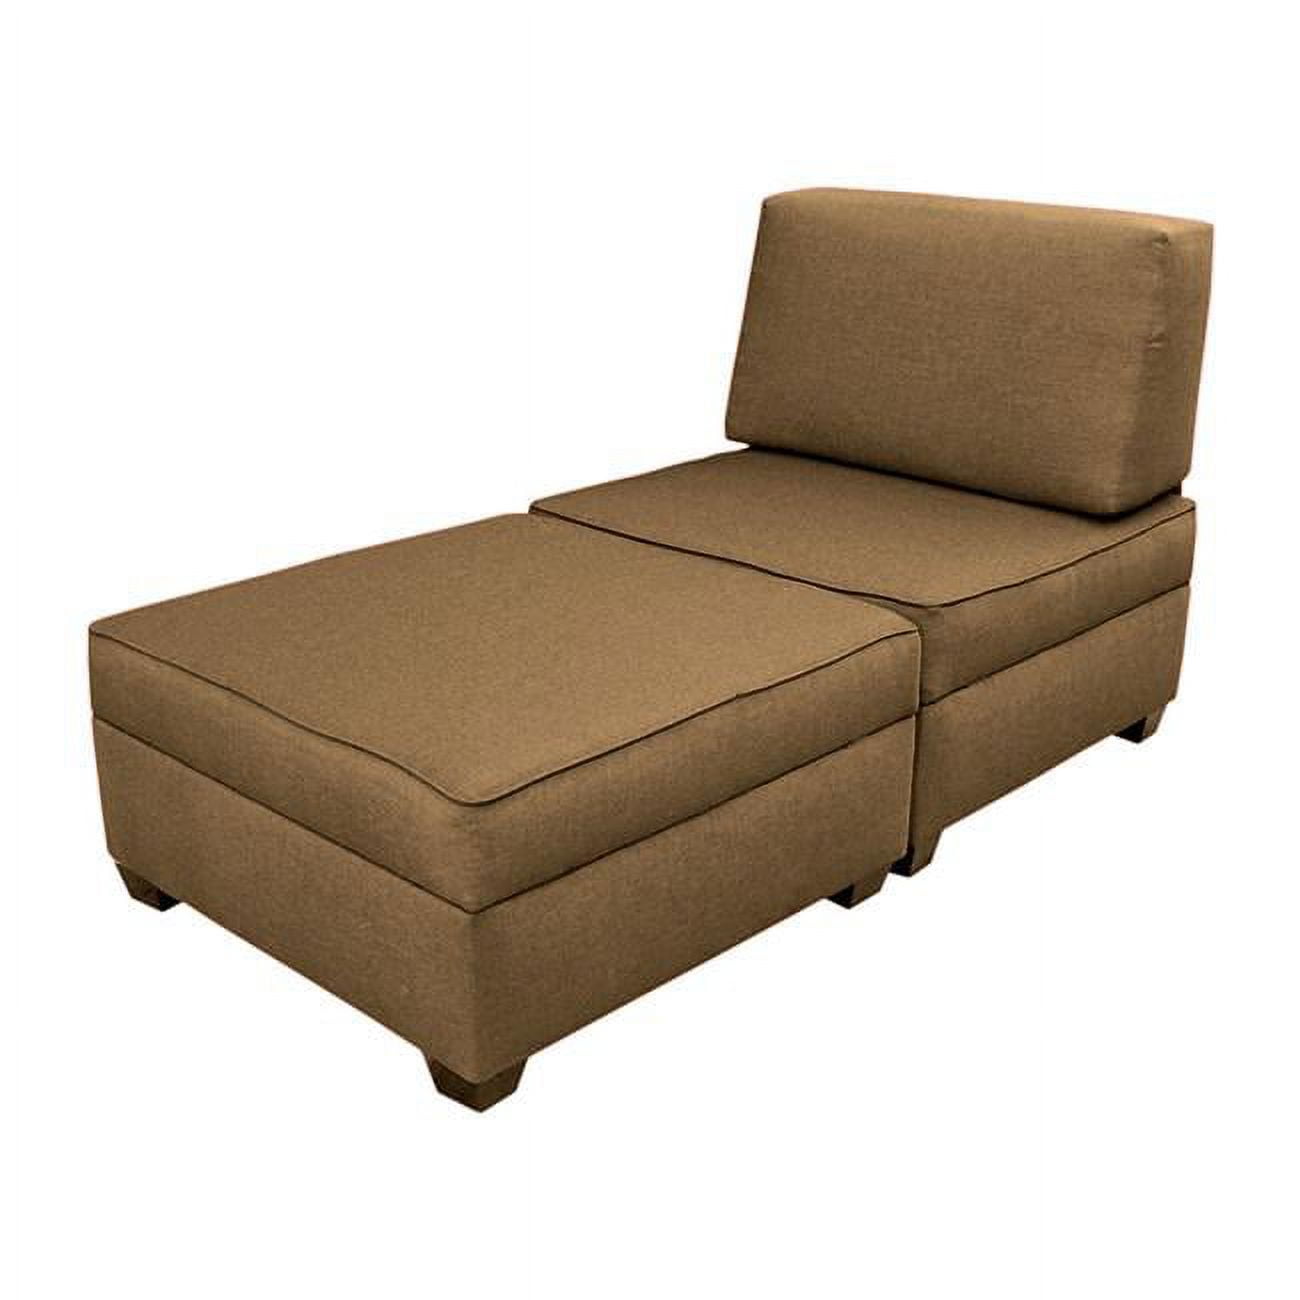 Mfcl-bs 36 In. Chaise Lounge Plus 1 Storage Ottomans - Mocha